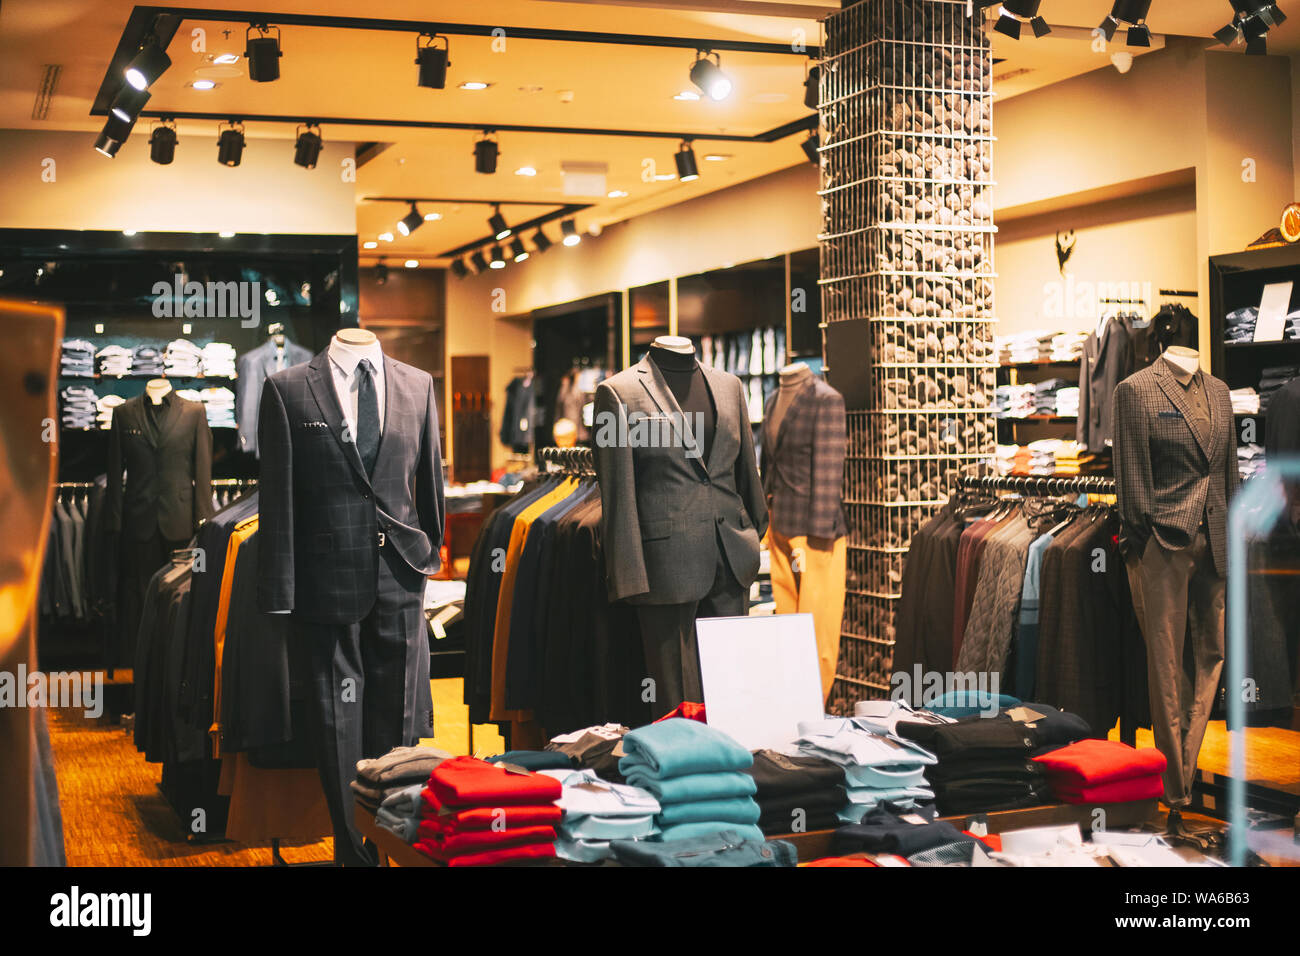 Male Business Style Clothing. Male Clothes On Mannequins And Hangers In Store Of Shopping Mall. Stock Photo